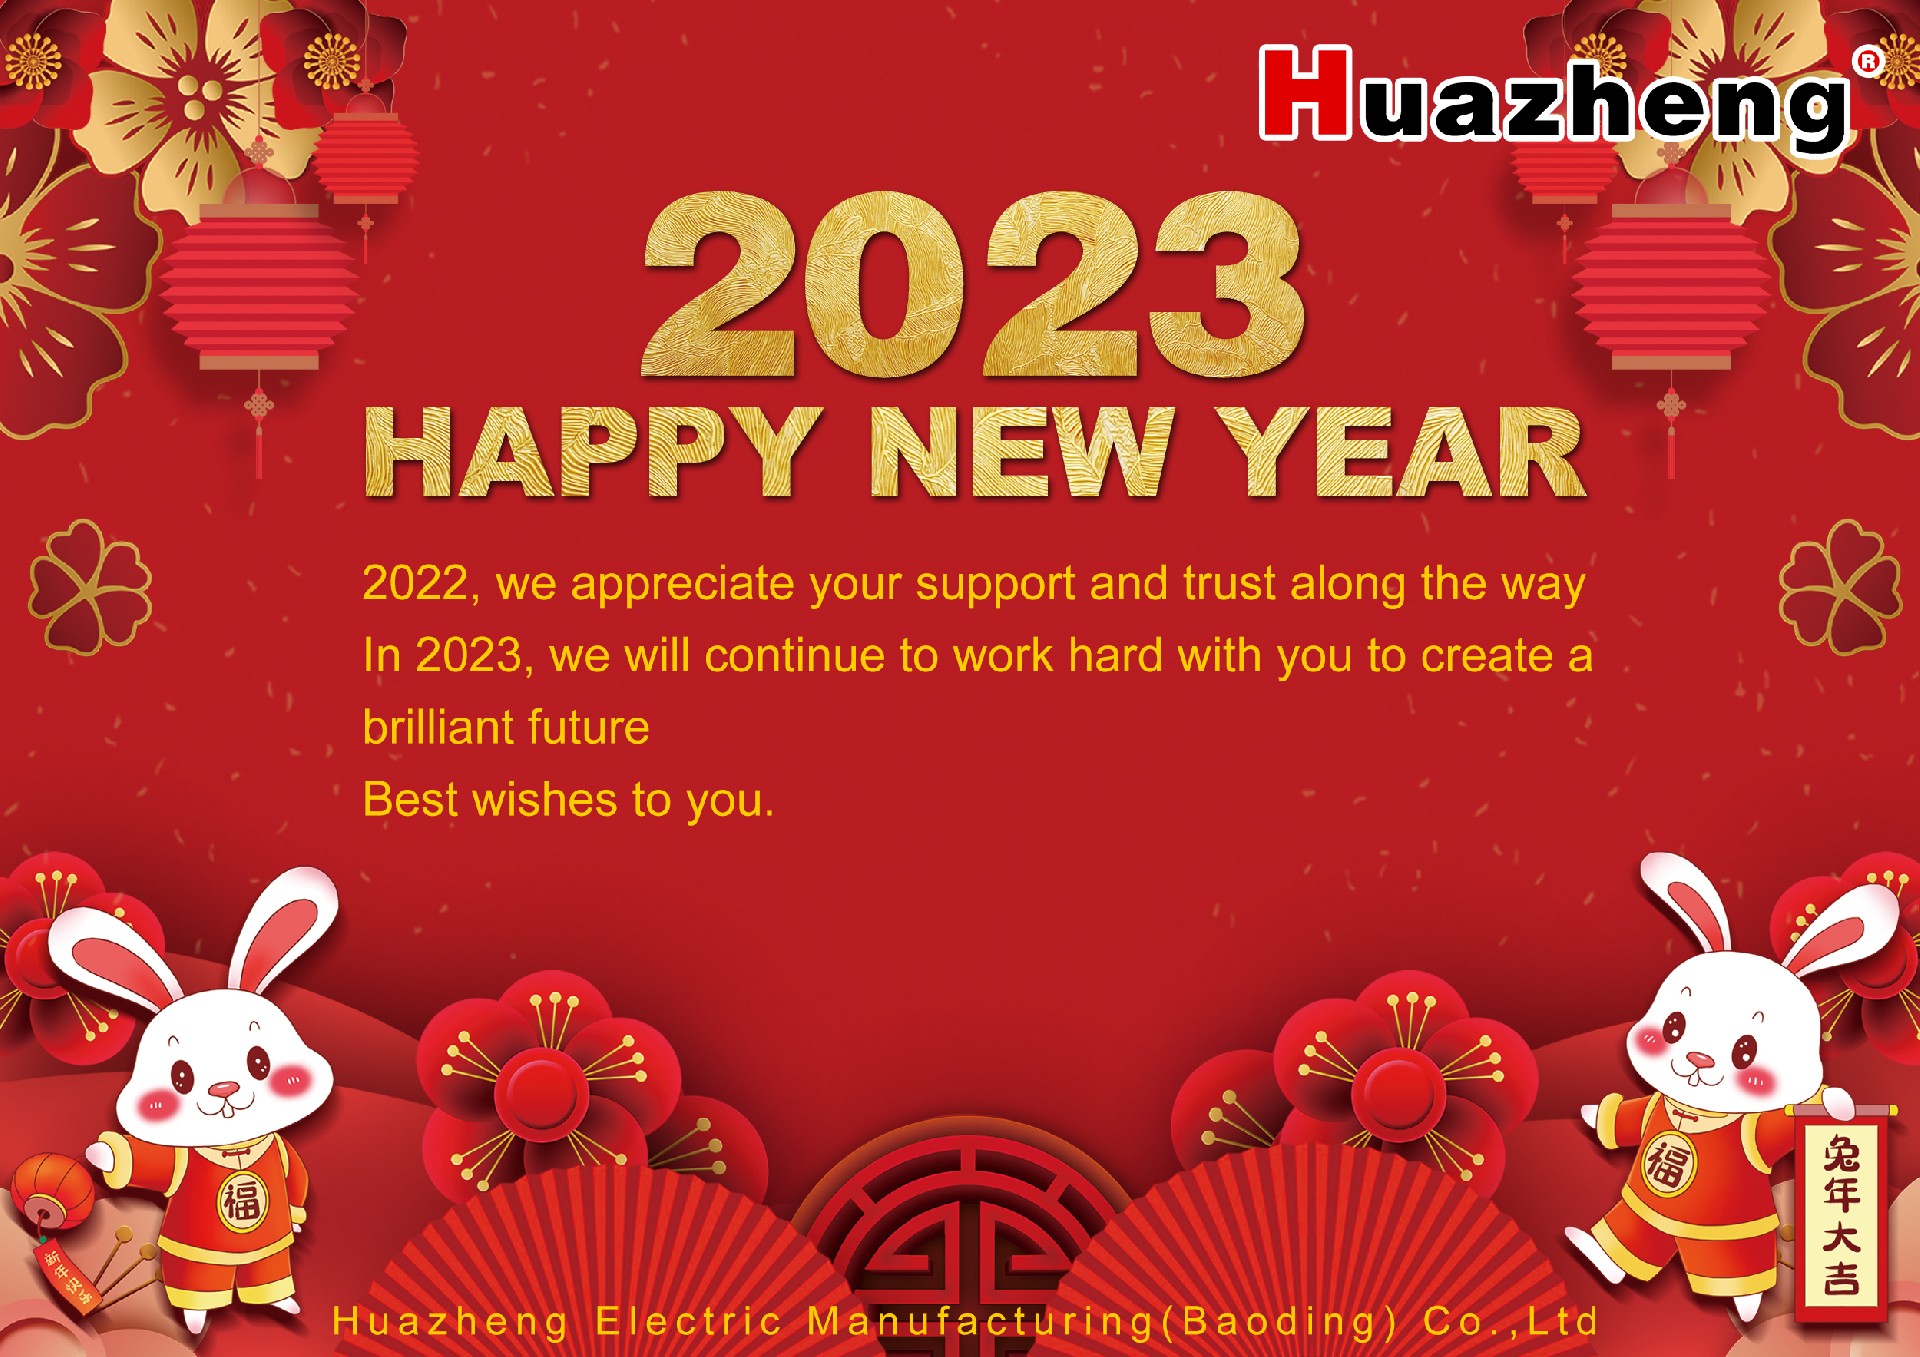 Huazheng Electric Wishes You A Happy Spring Festival in 2023